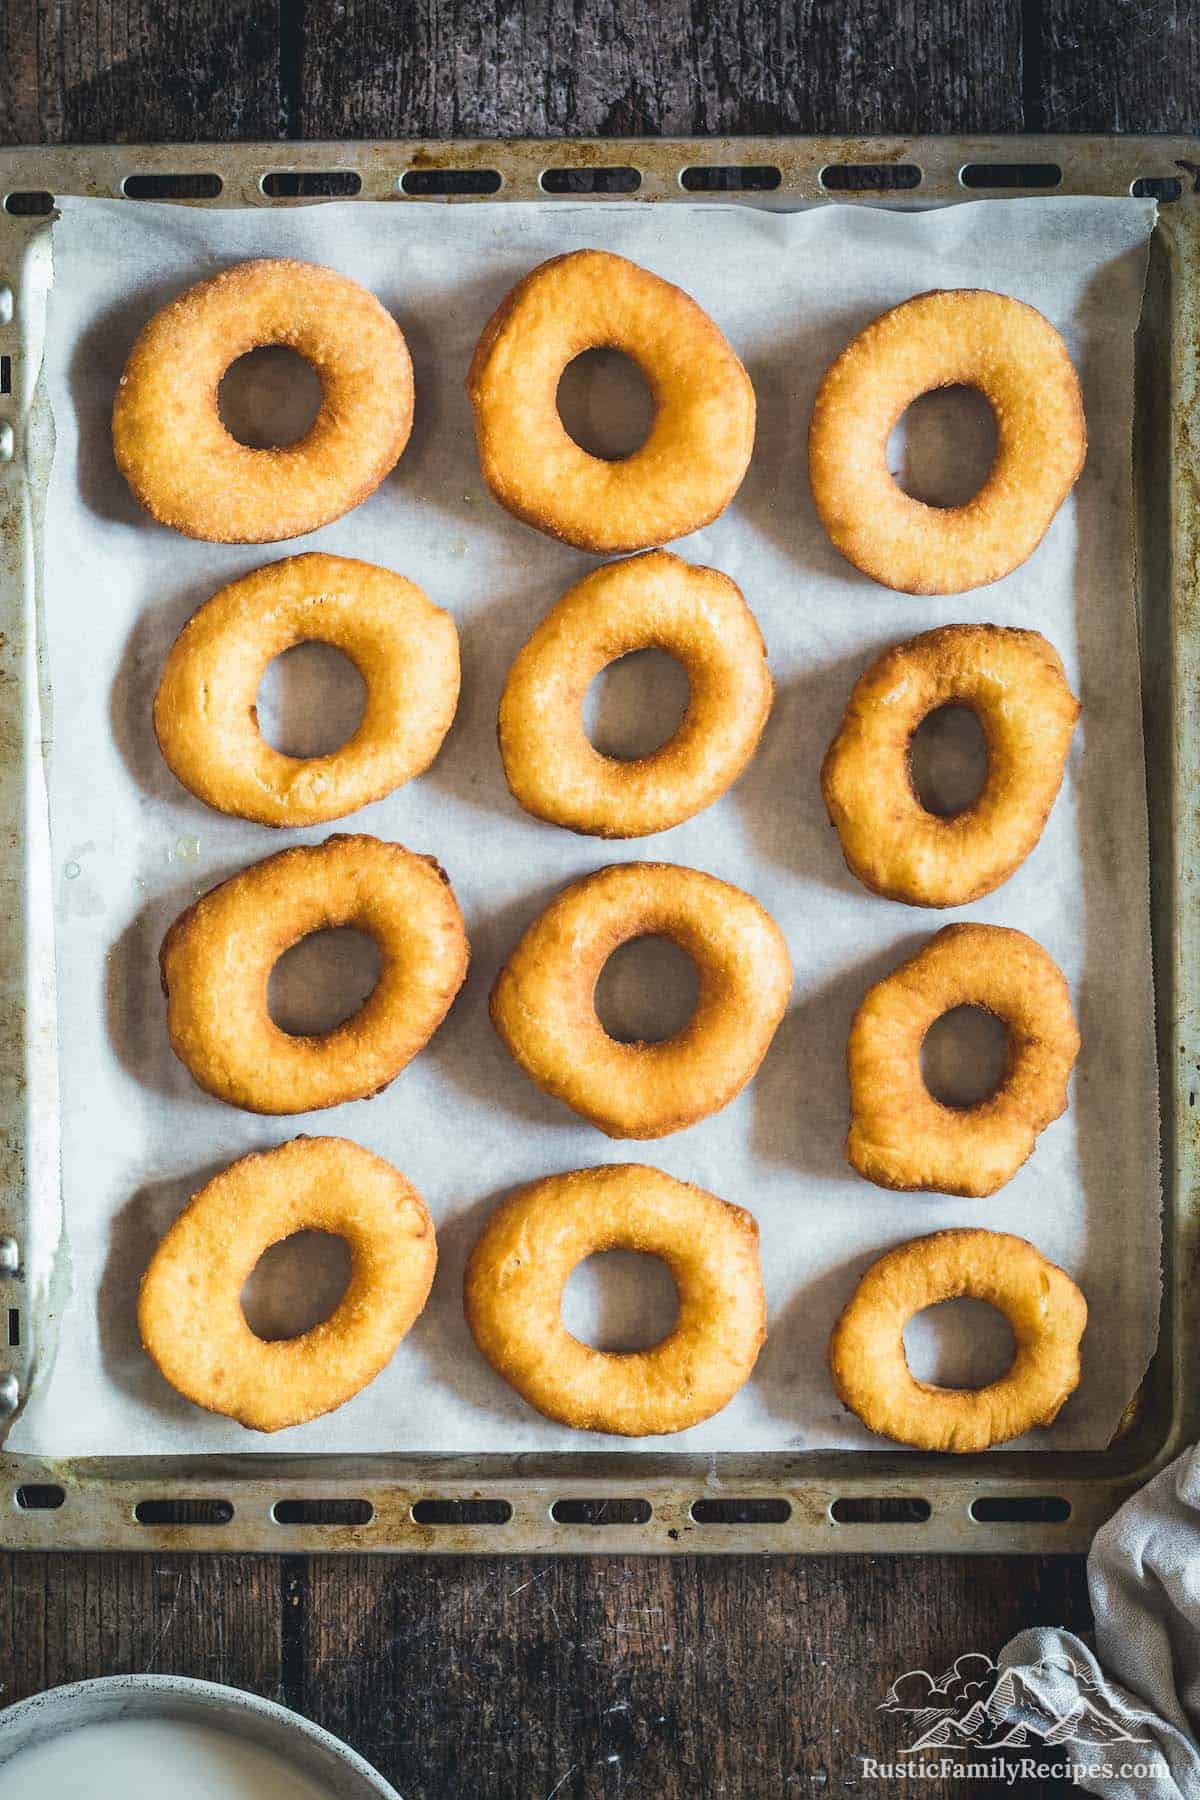 Overhead view of fried, unglazed sour cream donuts